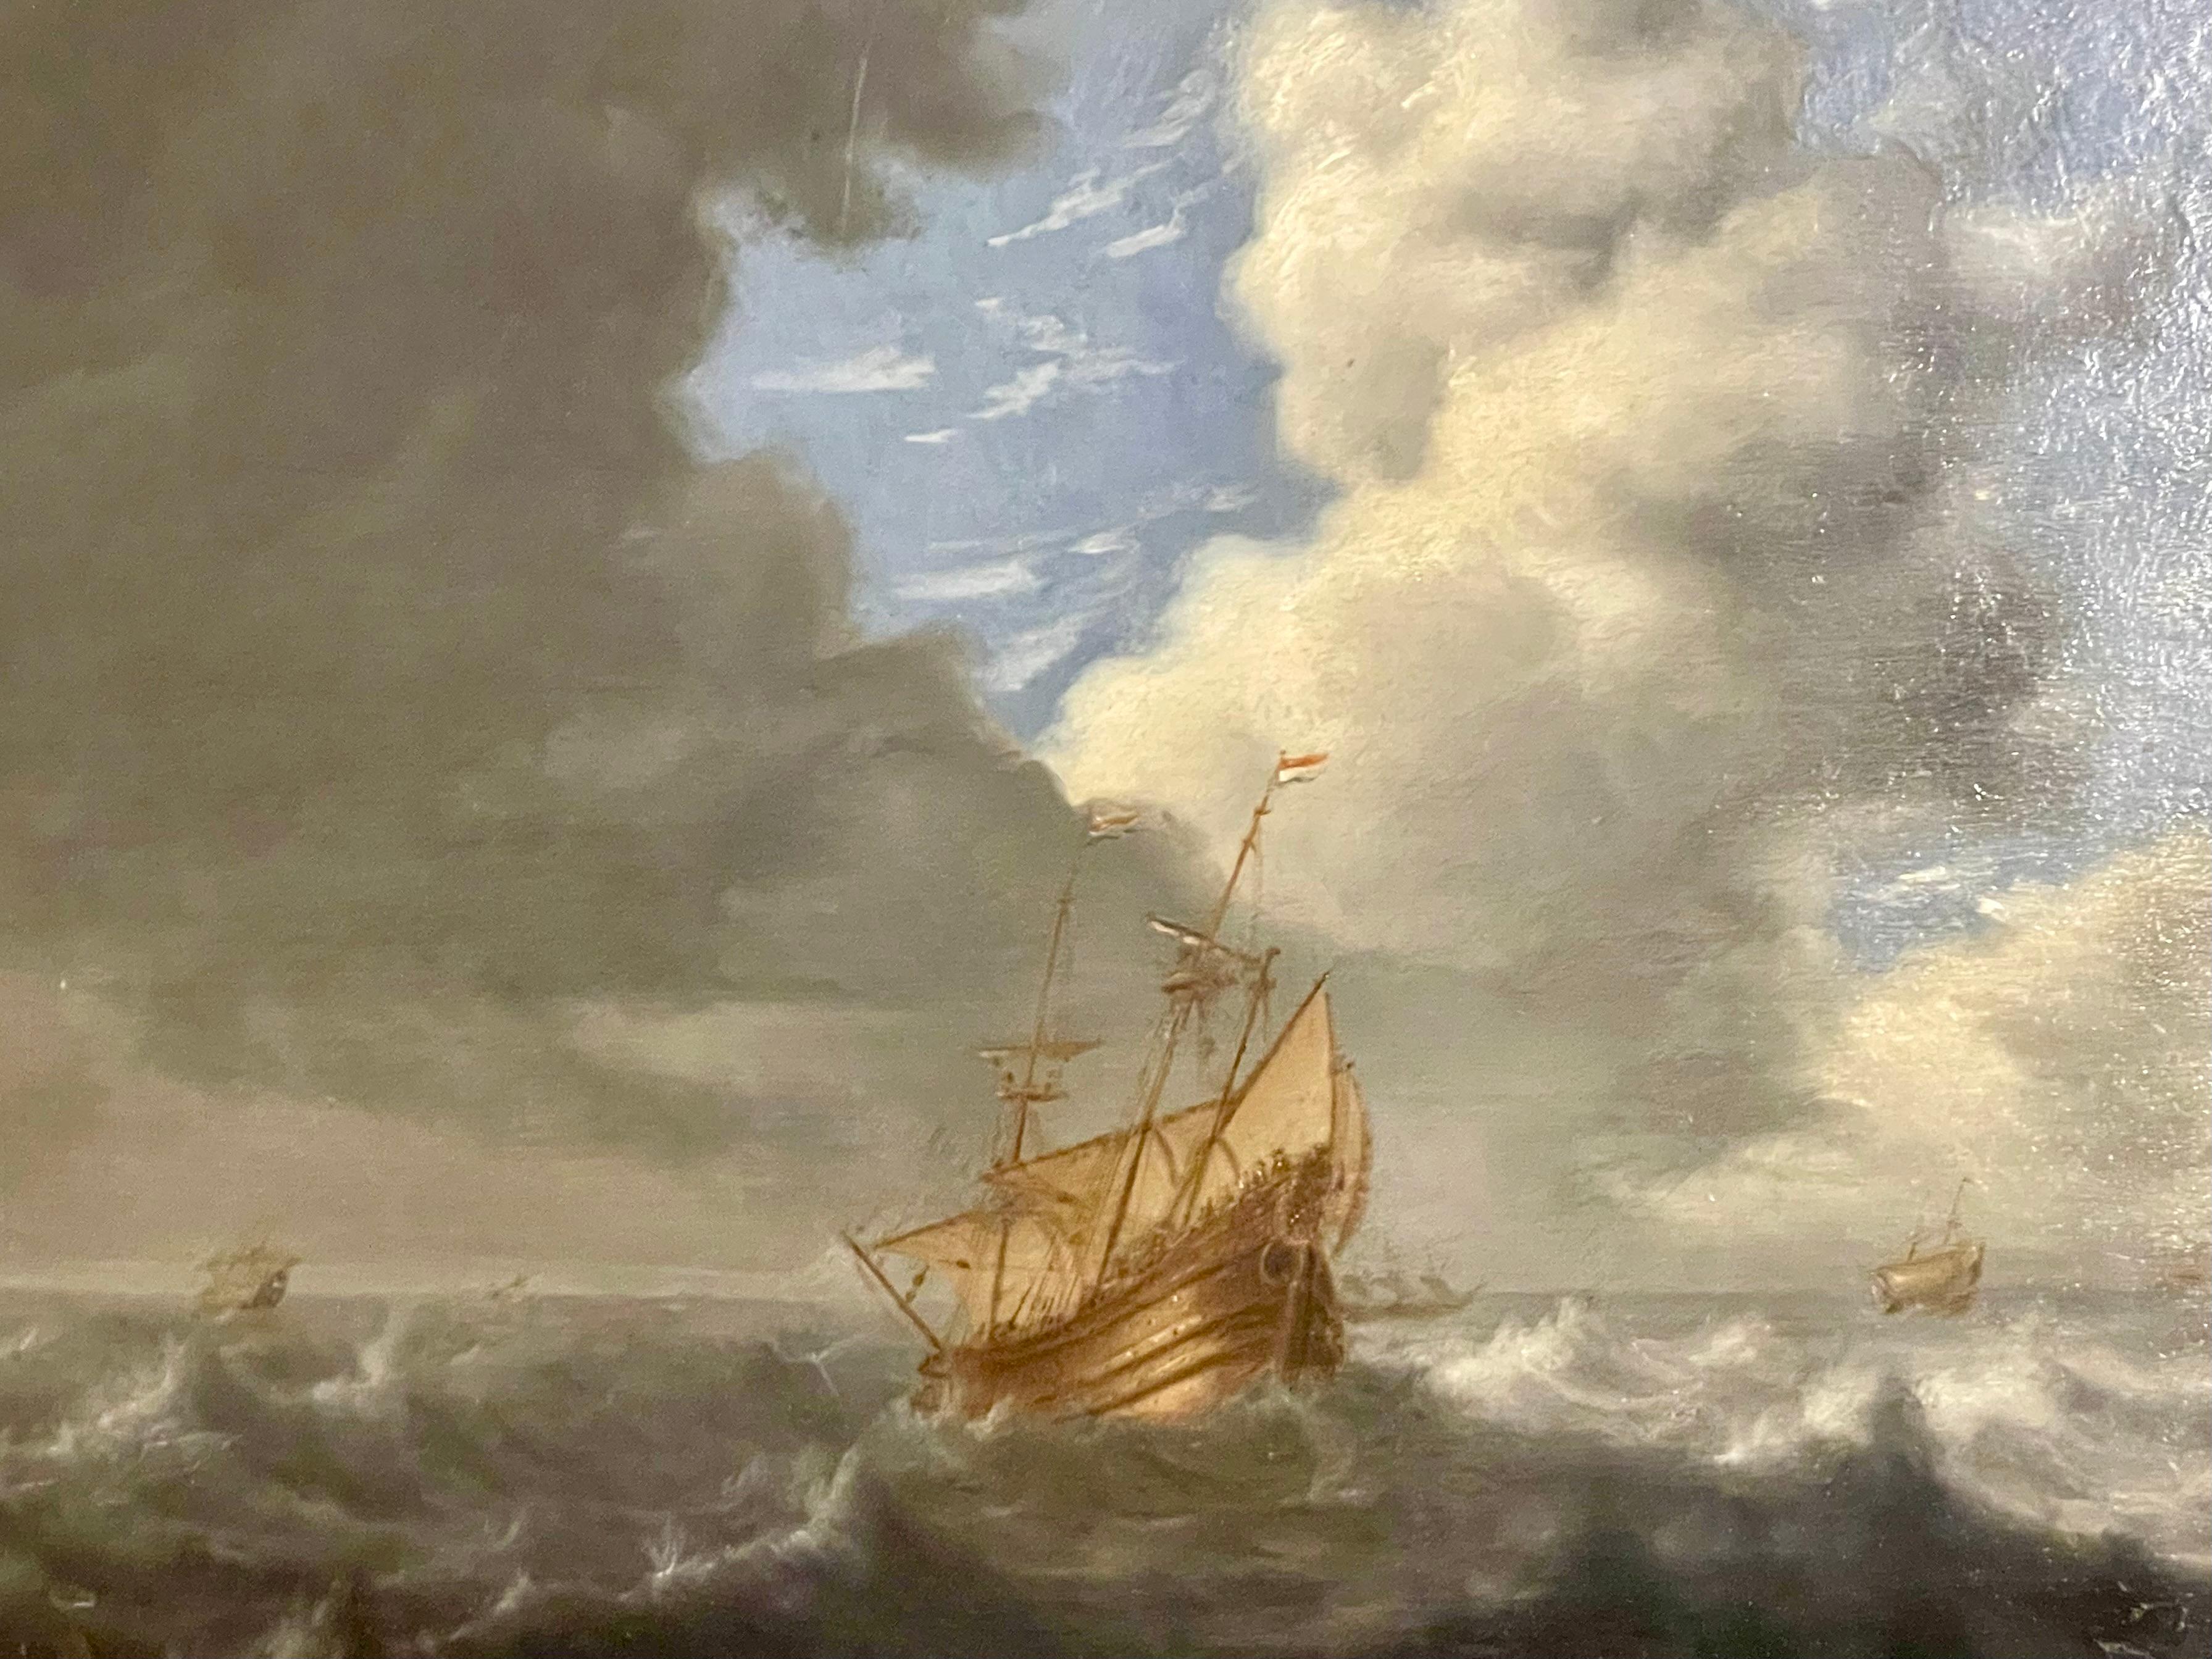 Dutch ships on rough seas 17th Century - Painting by Unknown